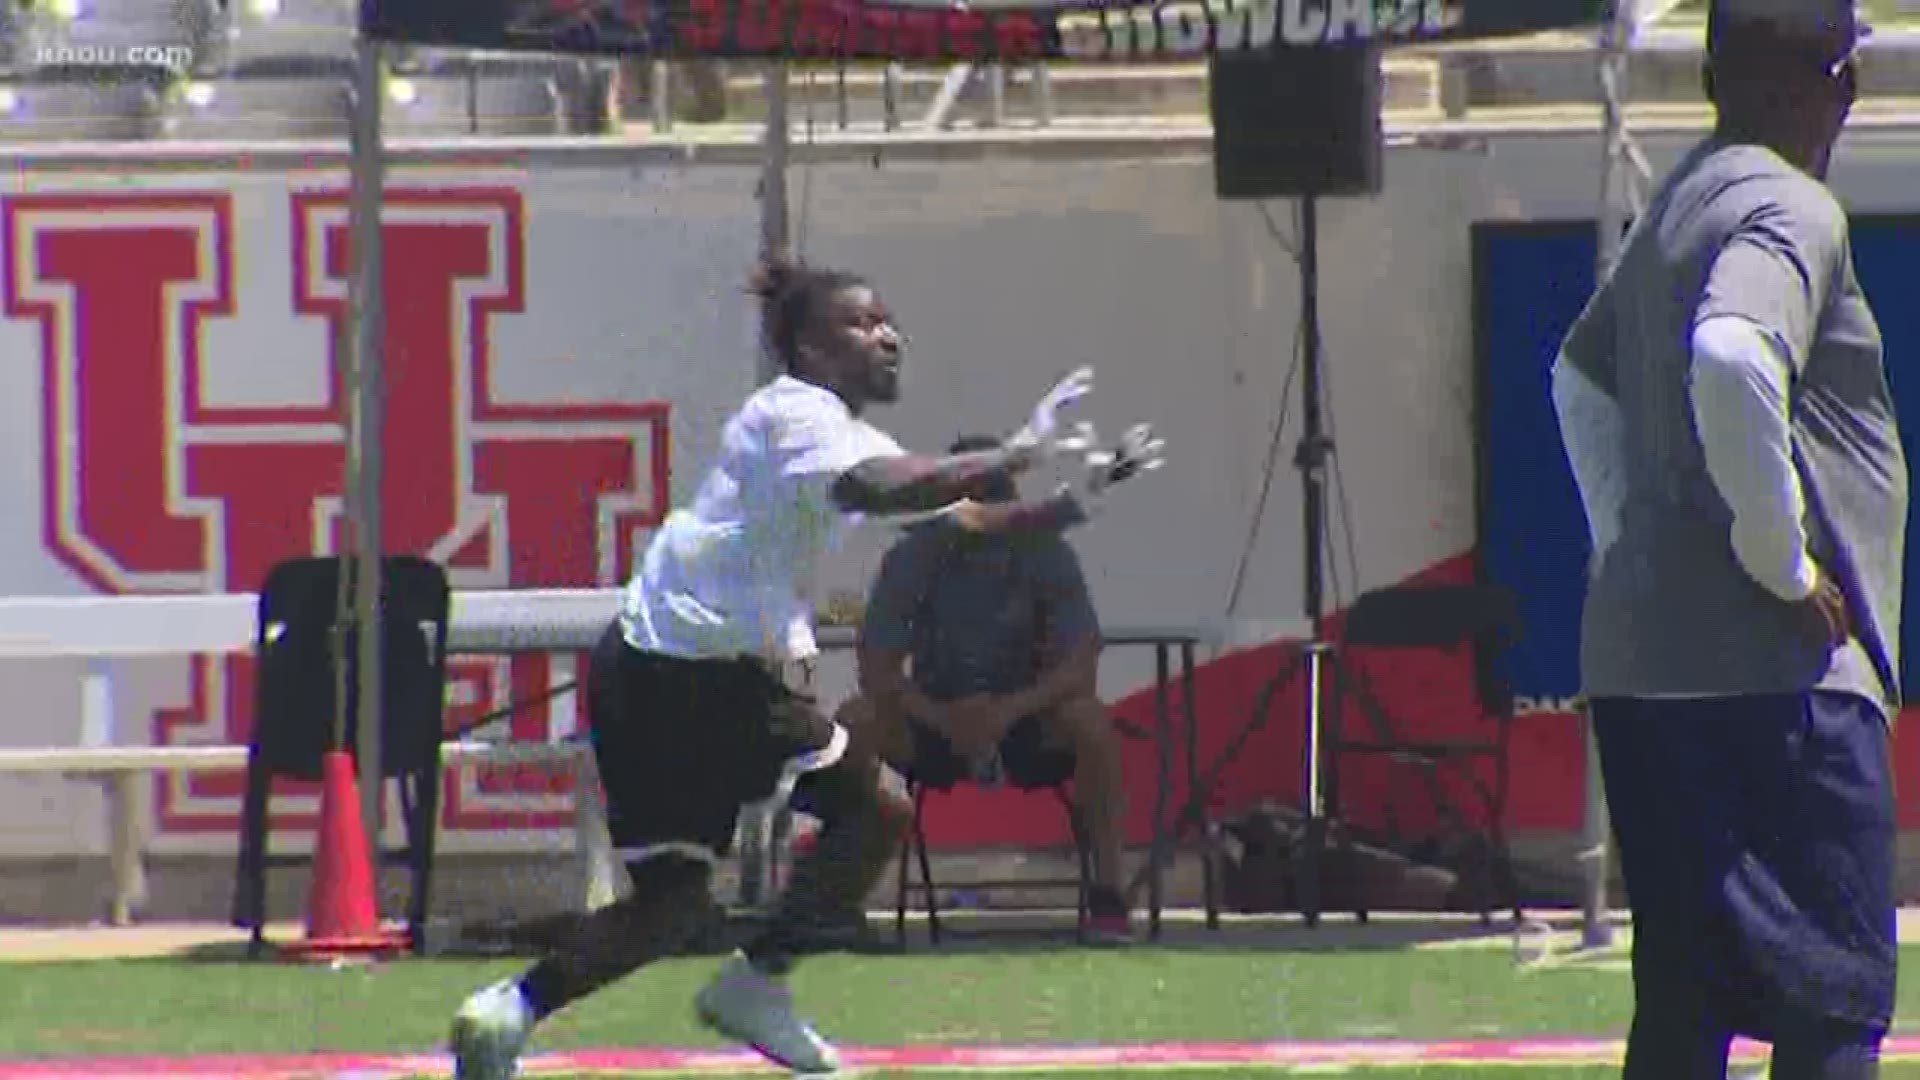 Houston's new XFL team held its first open tryouts Saturday at the University of Houston.